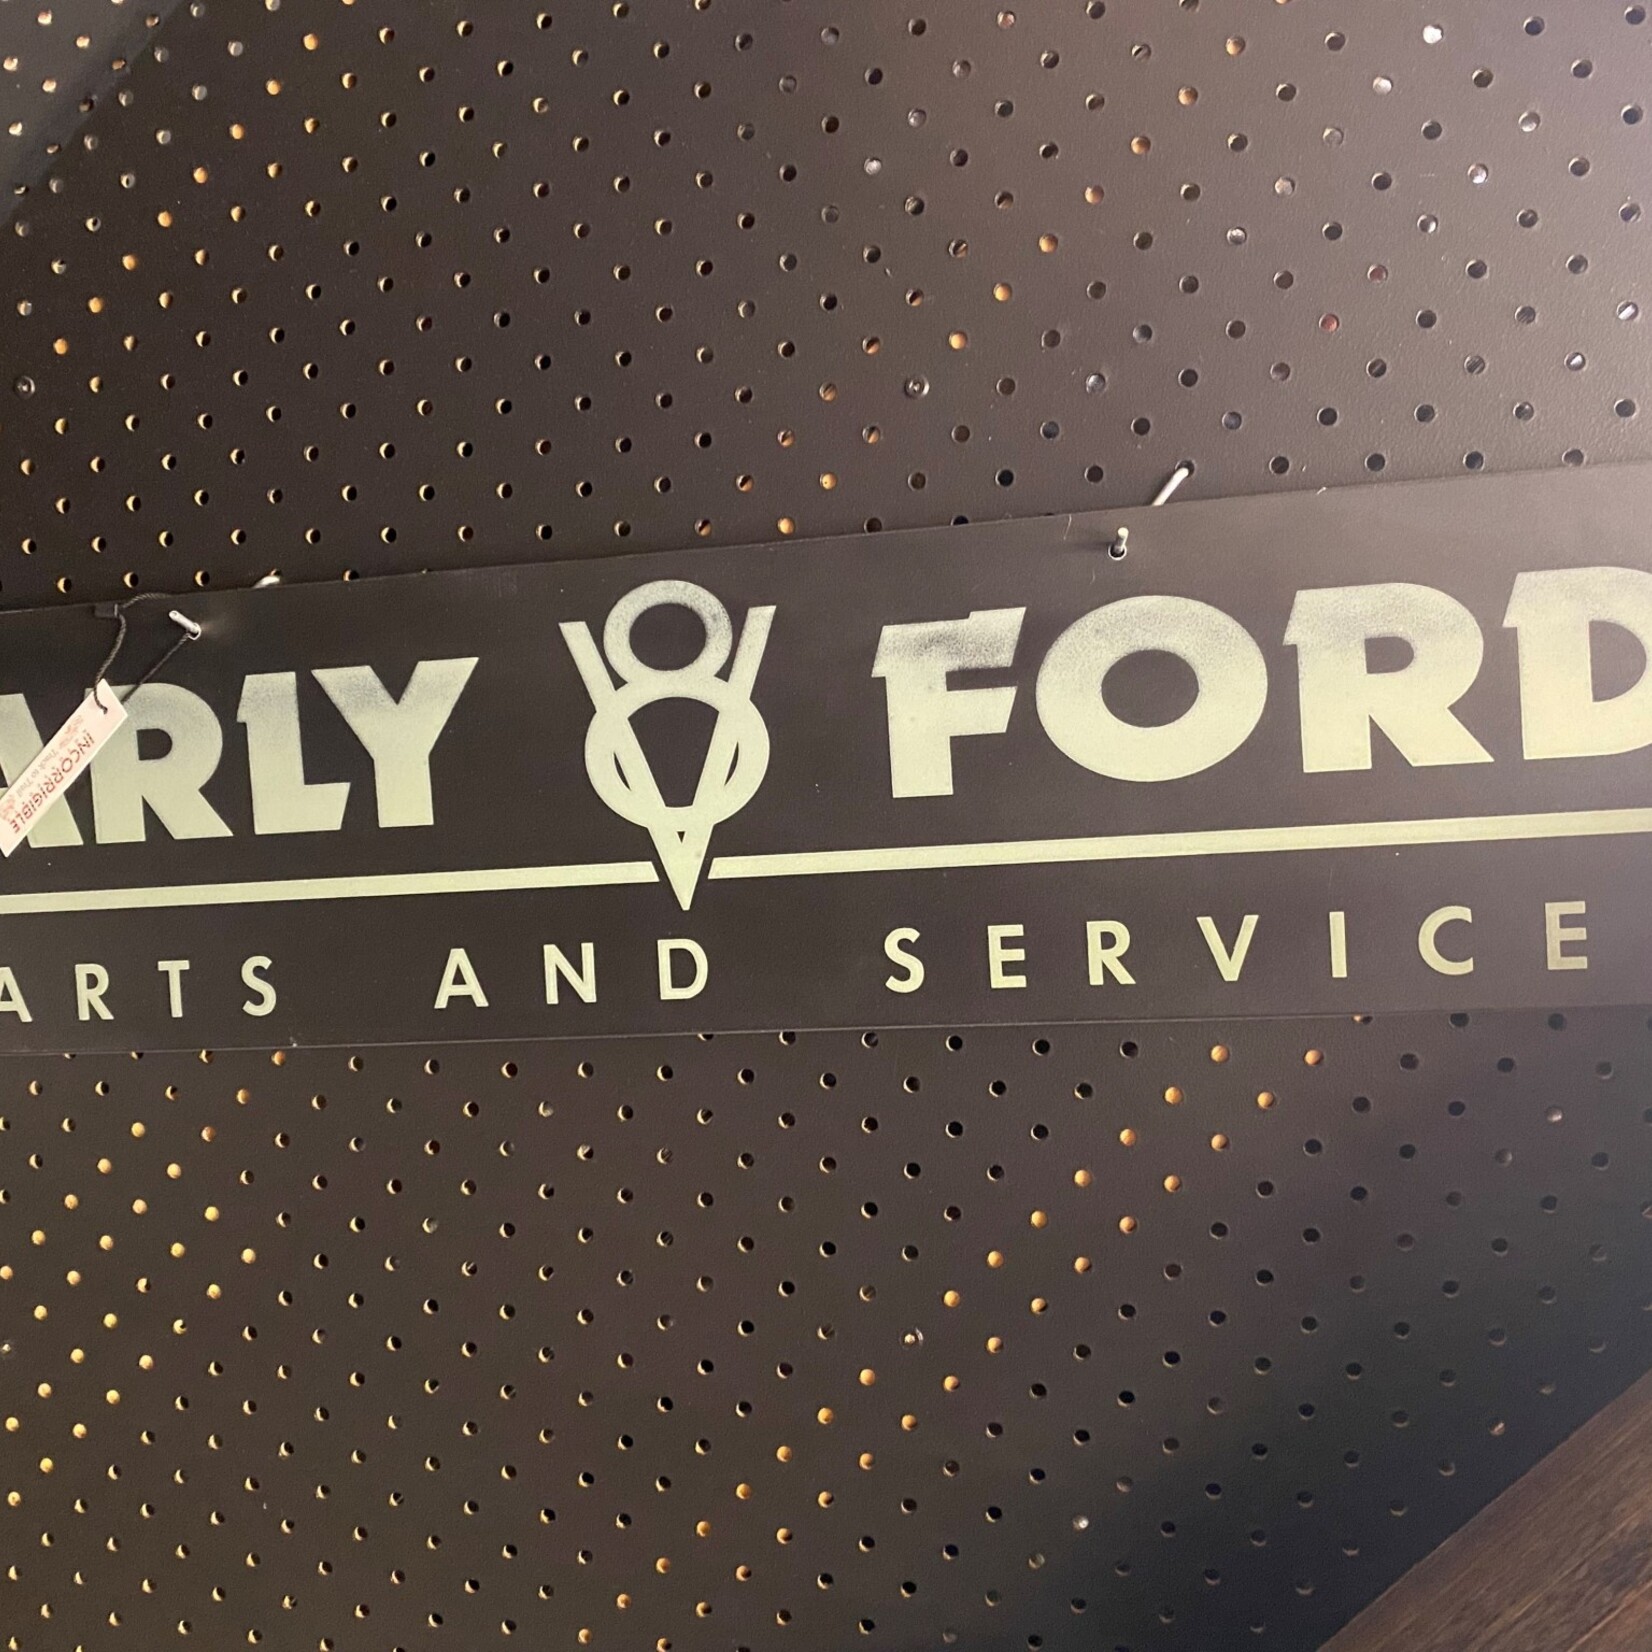 RON CORDER CUSTOMS RON CORDER CUSTOMS "EARLY V8 FORD PARTS AND SERVICE" BLACK